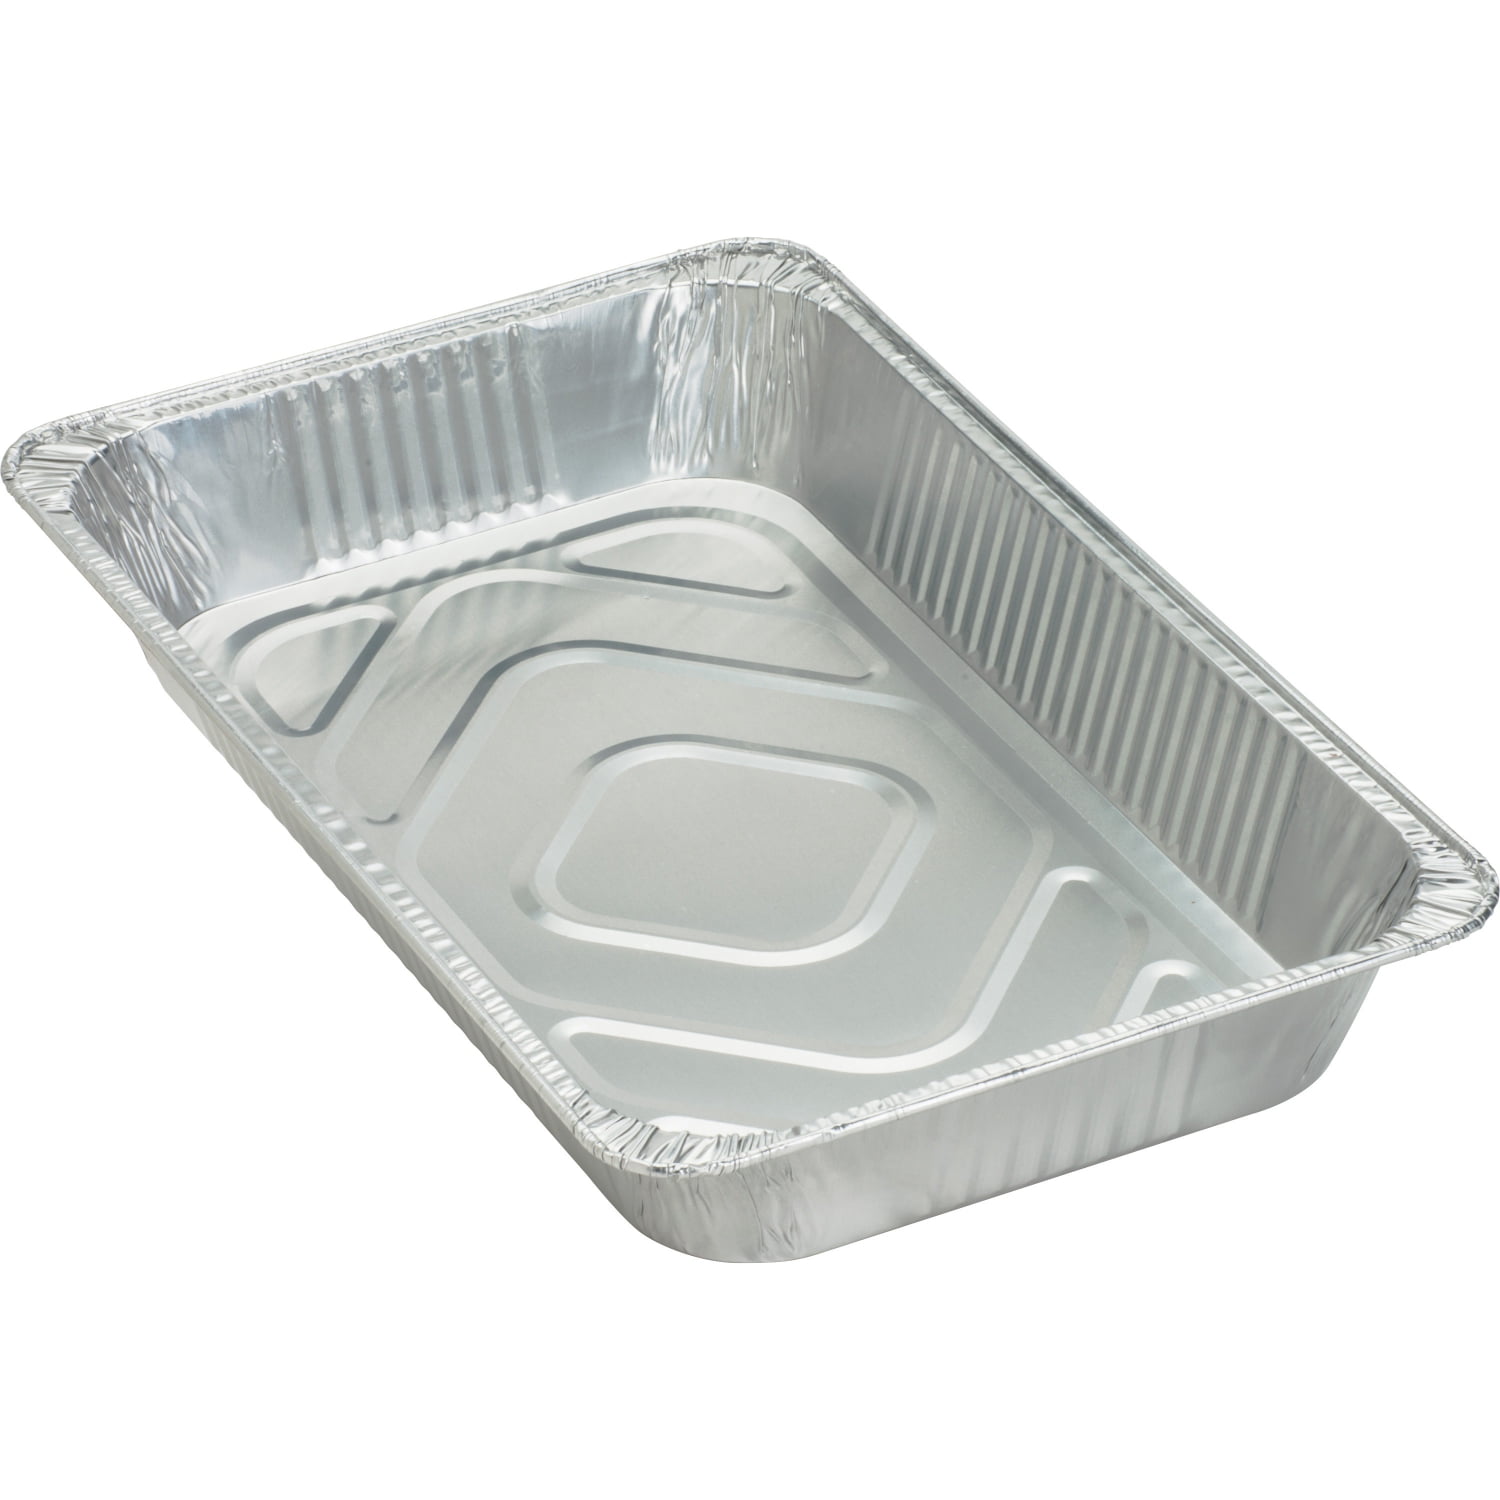 Take Out Containers Aluminum Includes 100 per case. Boardwalk Half ...